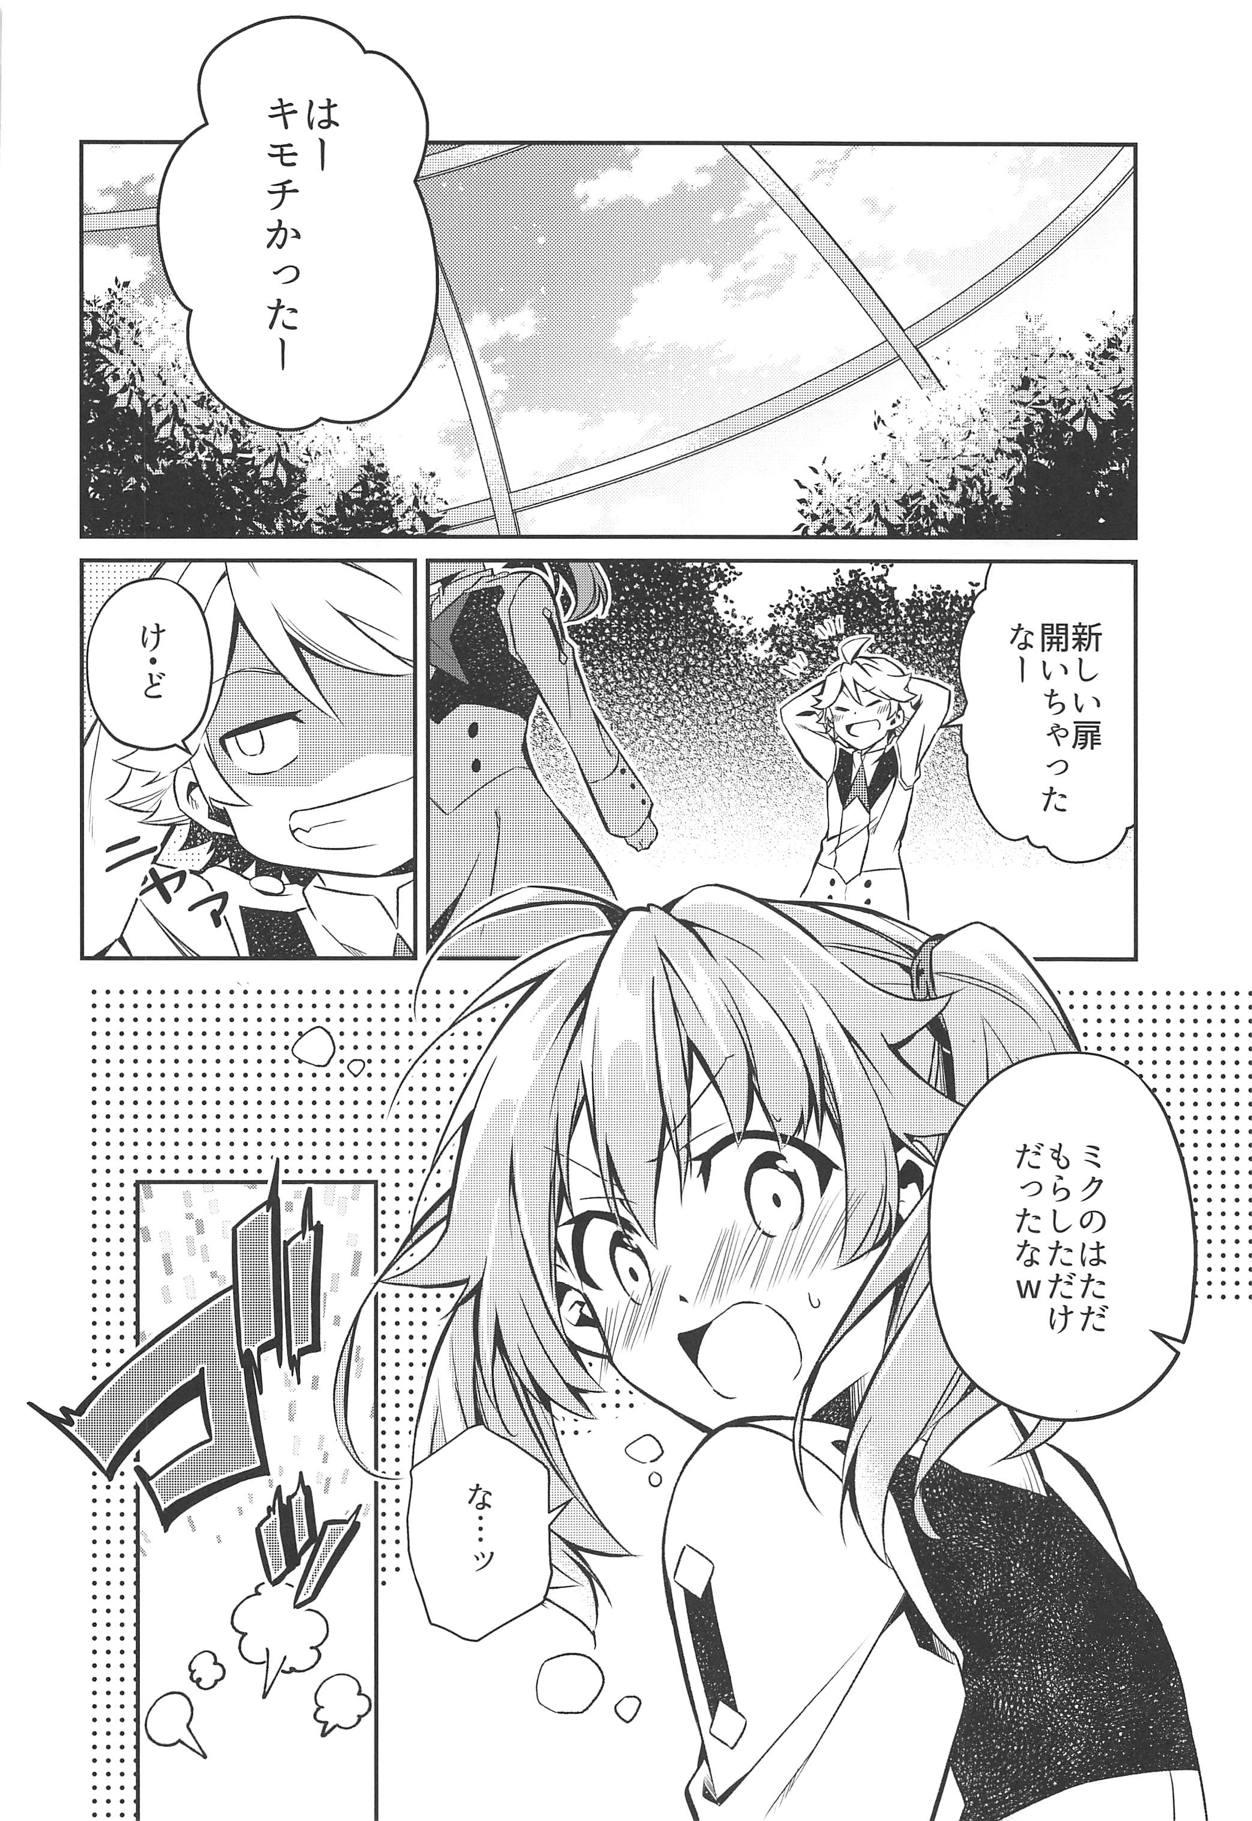 Guy KISS OF EROS - Darling in the franxx Cums - Page 11